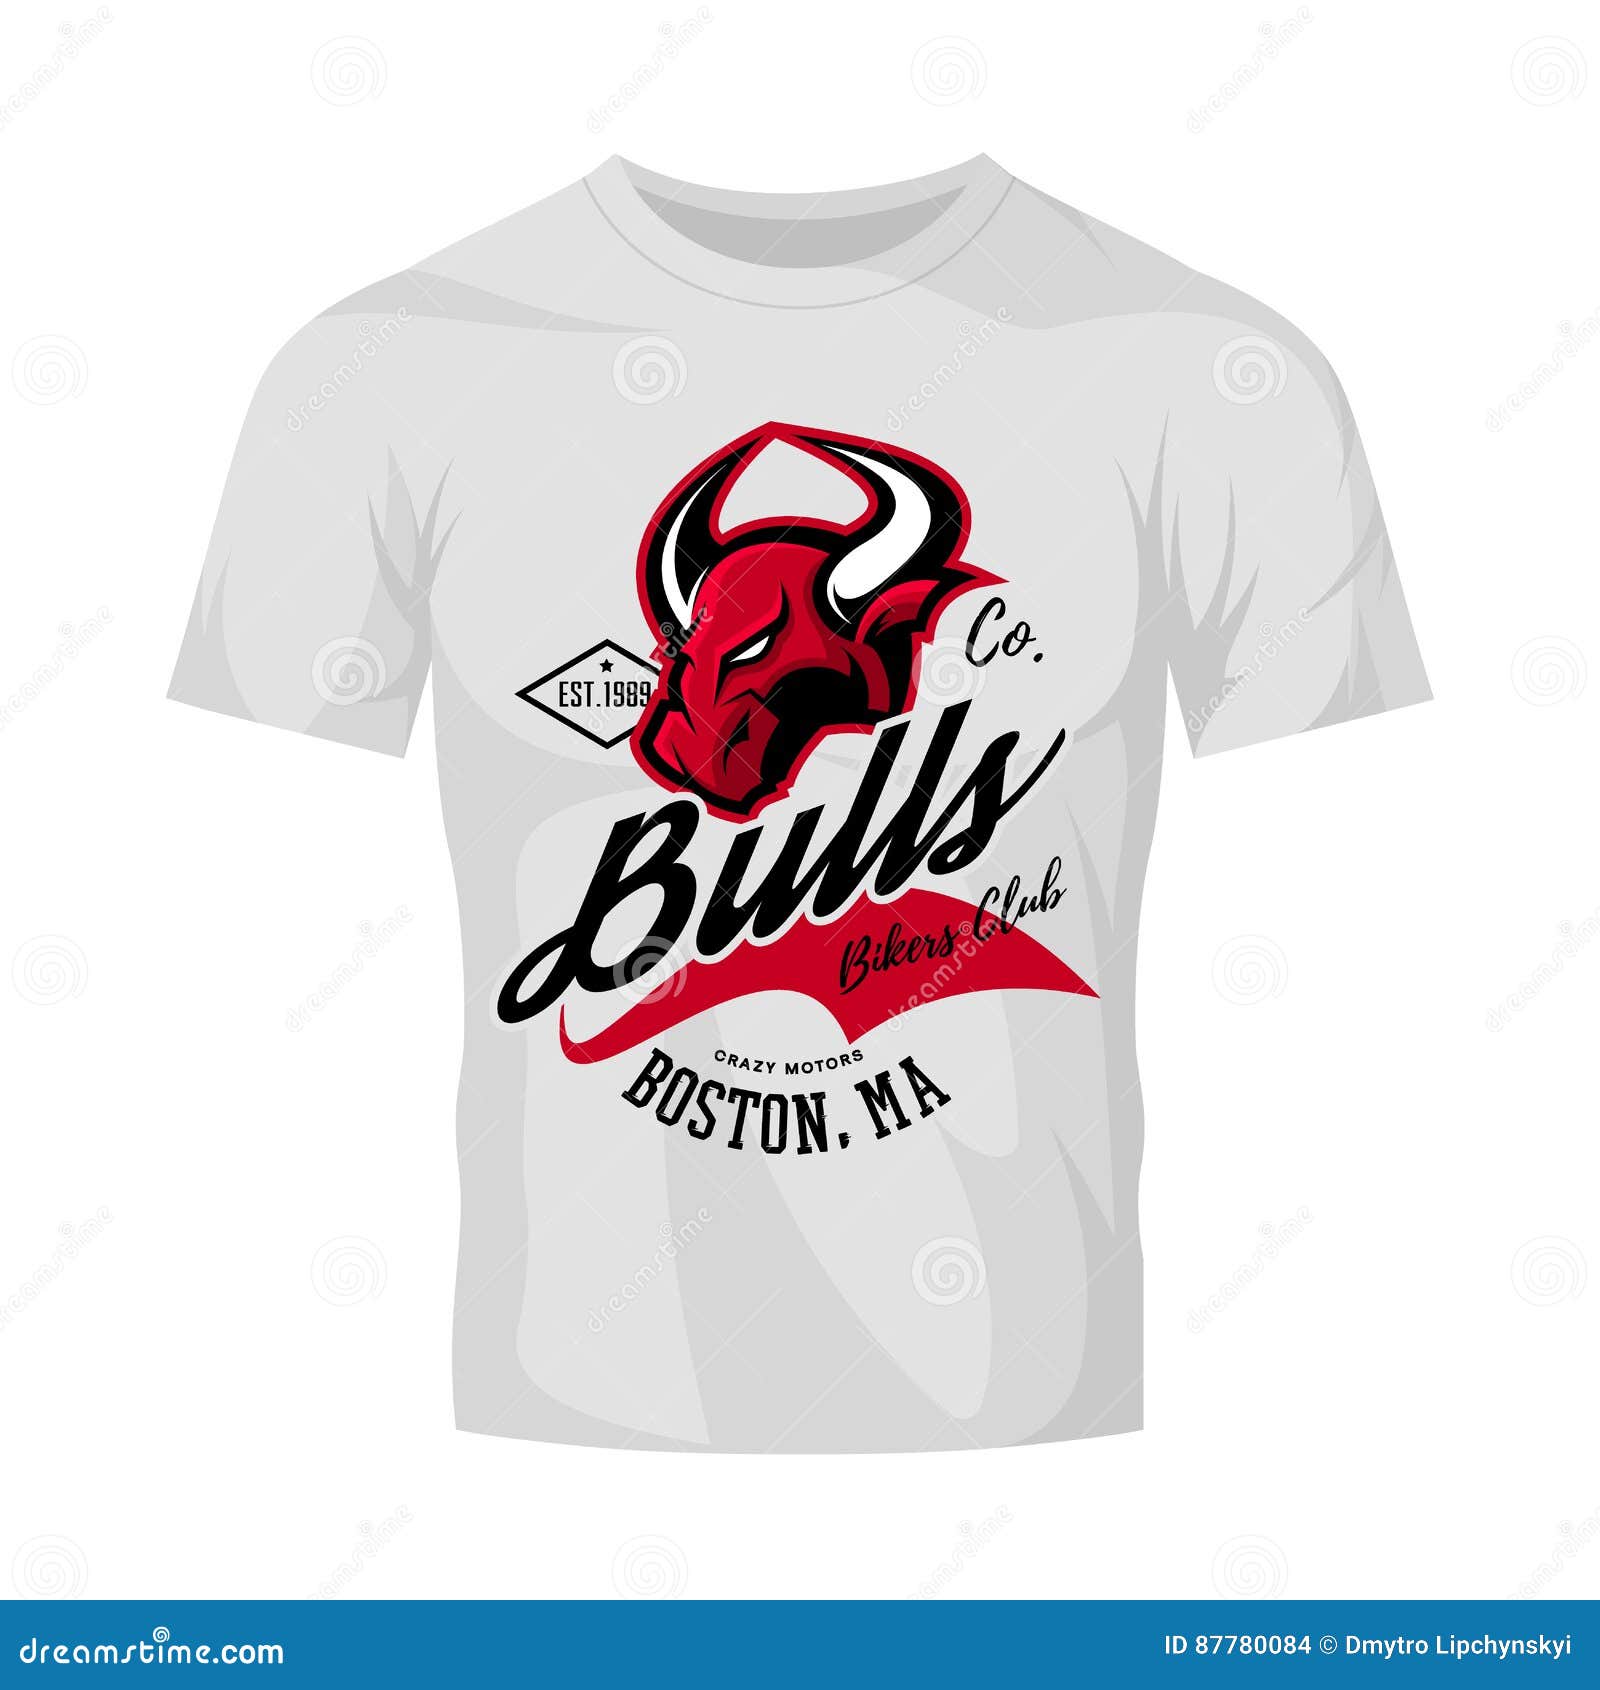 Vintage American Furious Bull Bikers Club Tee Print Vector Design Isolated  on White T-shirt Mockup. Stock Vector - Illustration of mock, isolated:  87780084